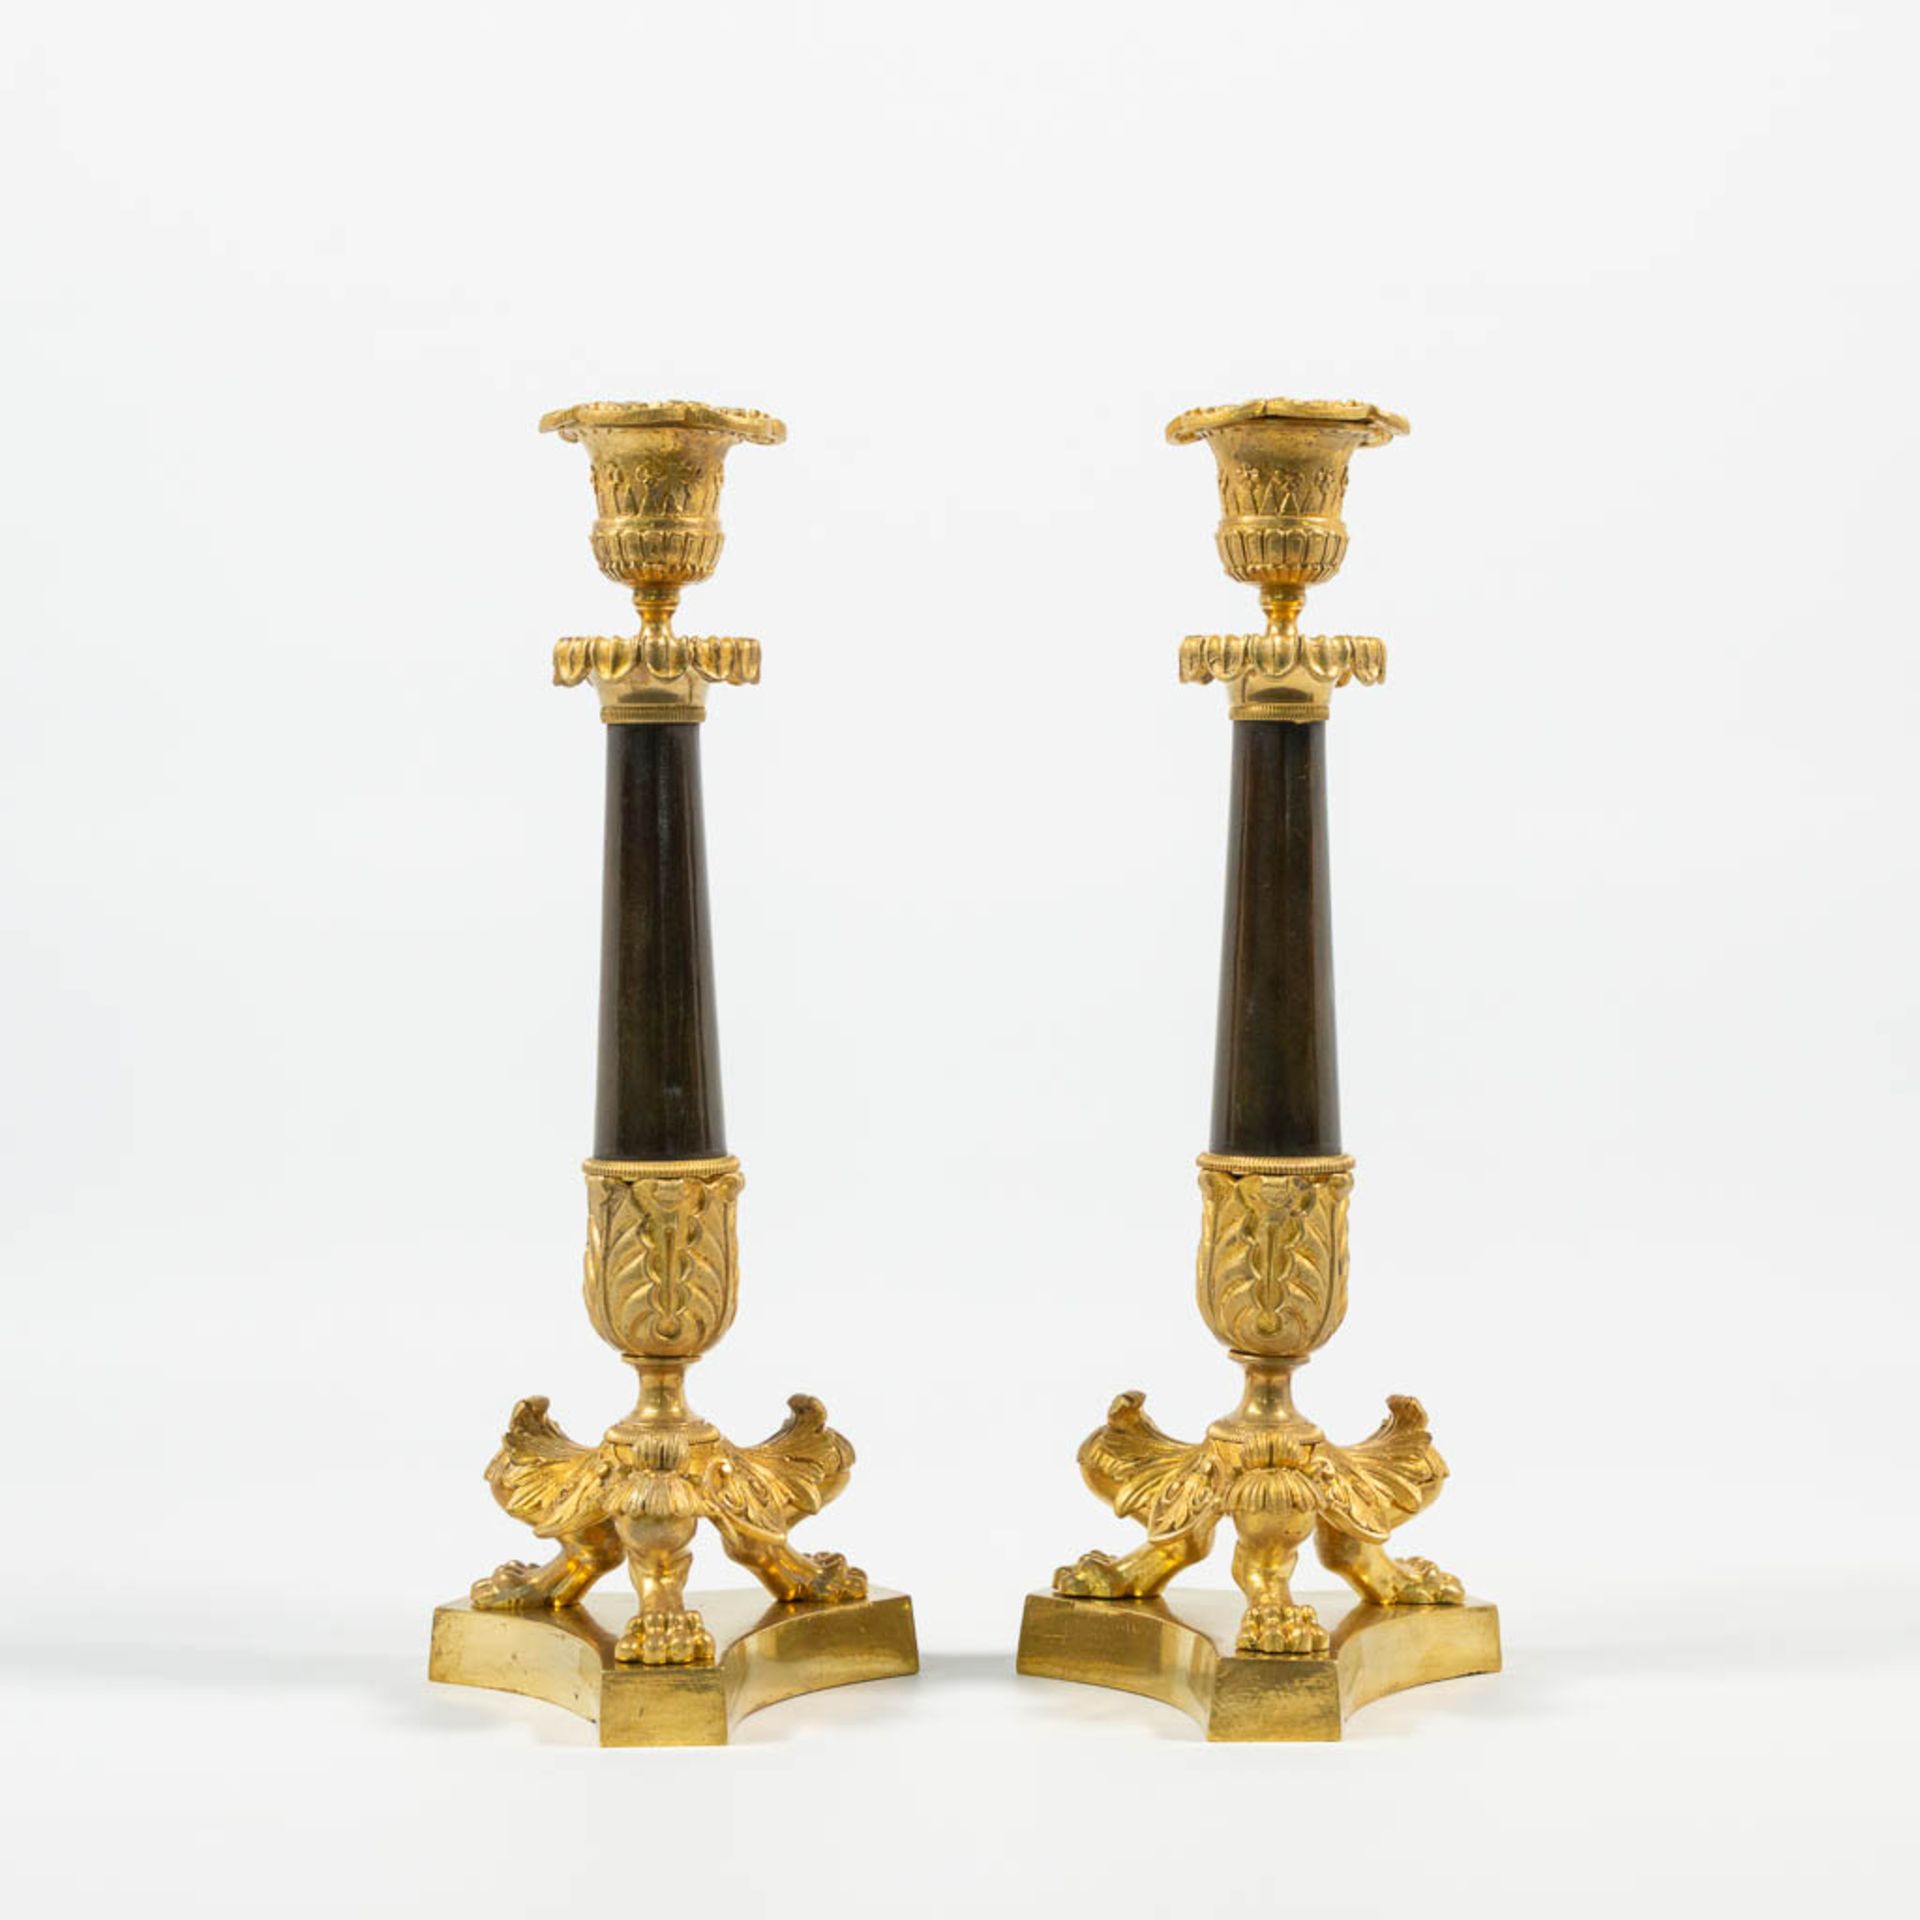 A pair of candlesticks made of ormolu bronze, Napoleon 3 style, 19th century.